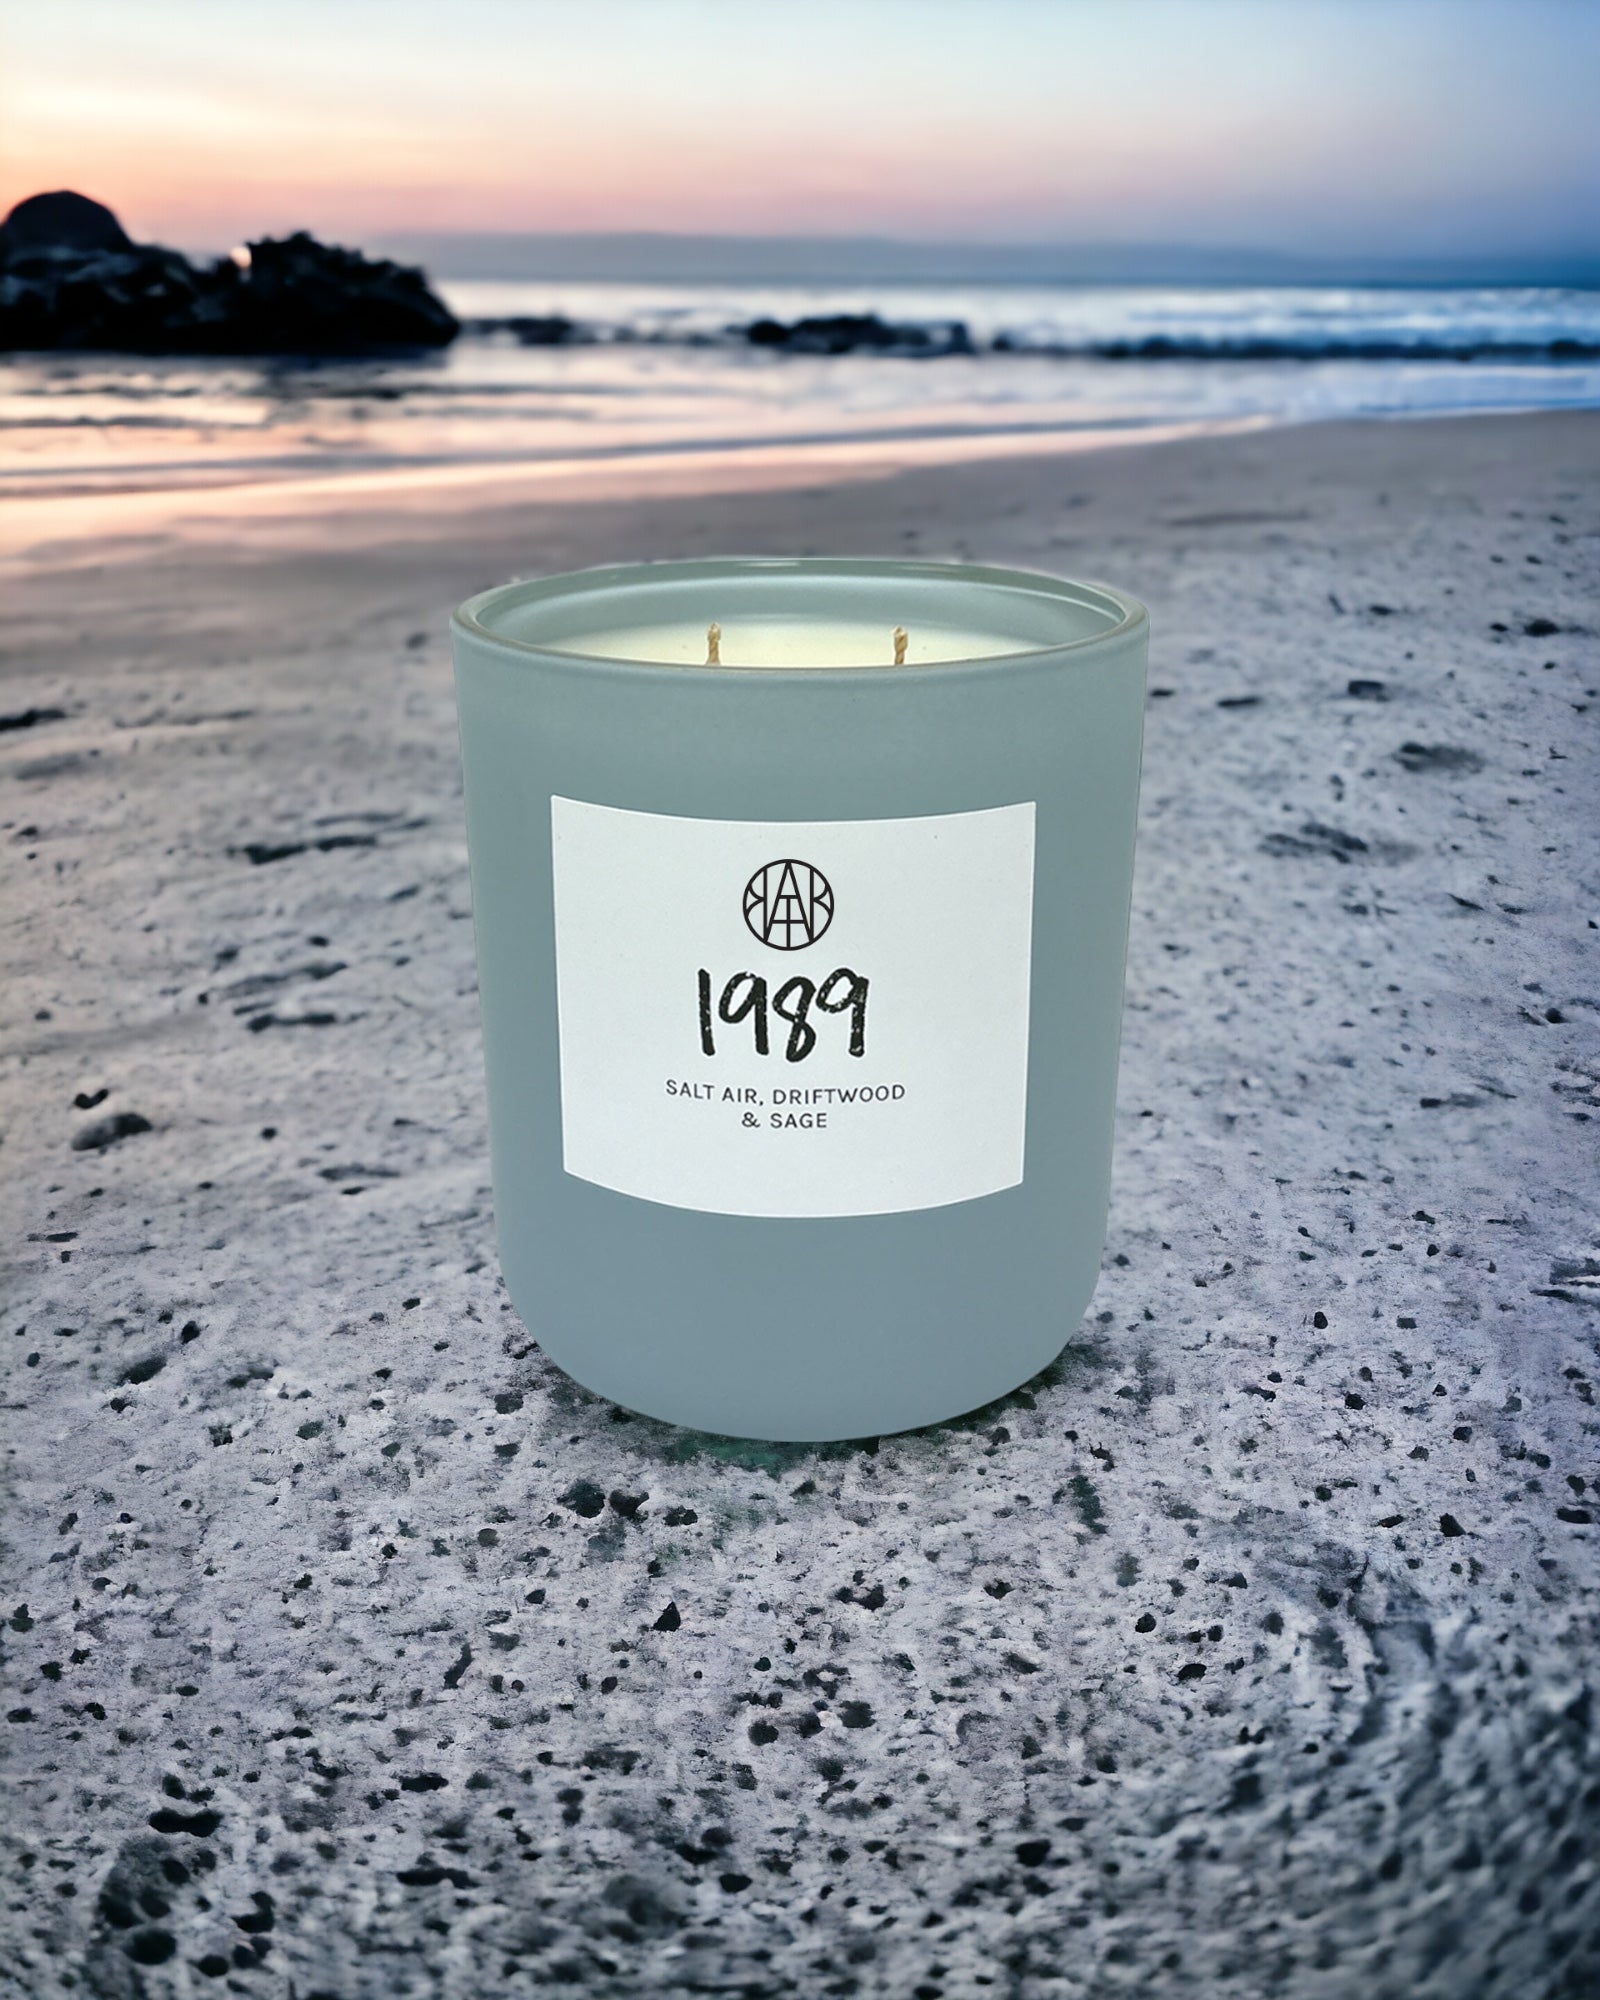 1989 - Deluxe Candle - AEMBR - Clean Luxury Candles, Wax Melts & Laundry Care